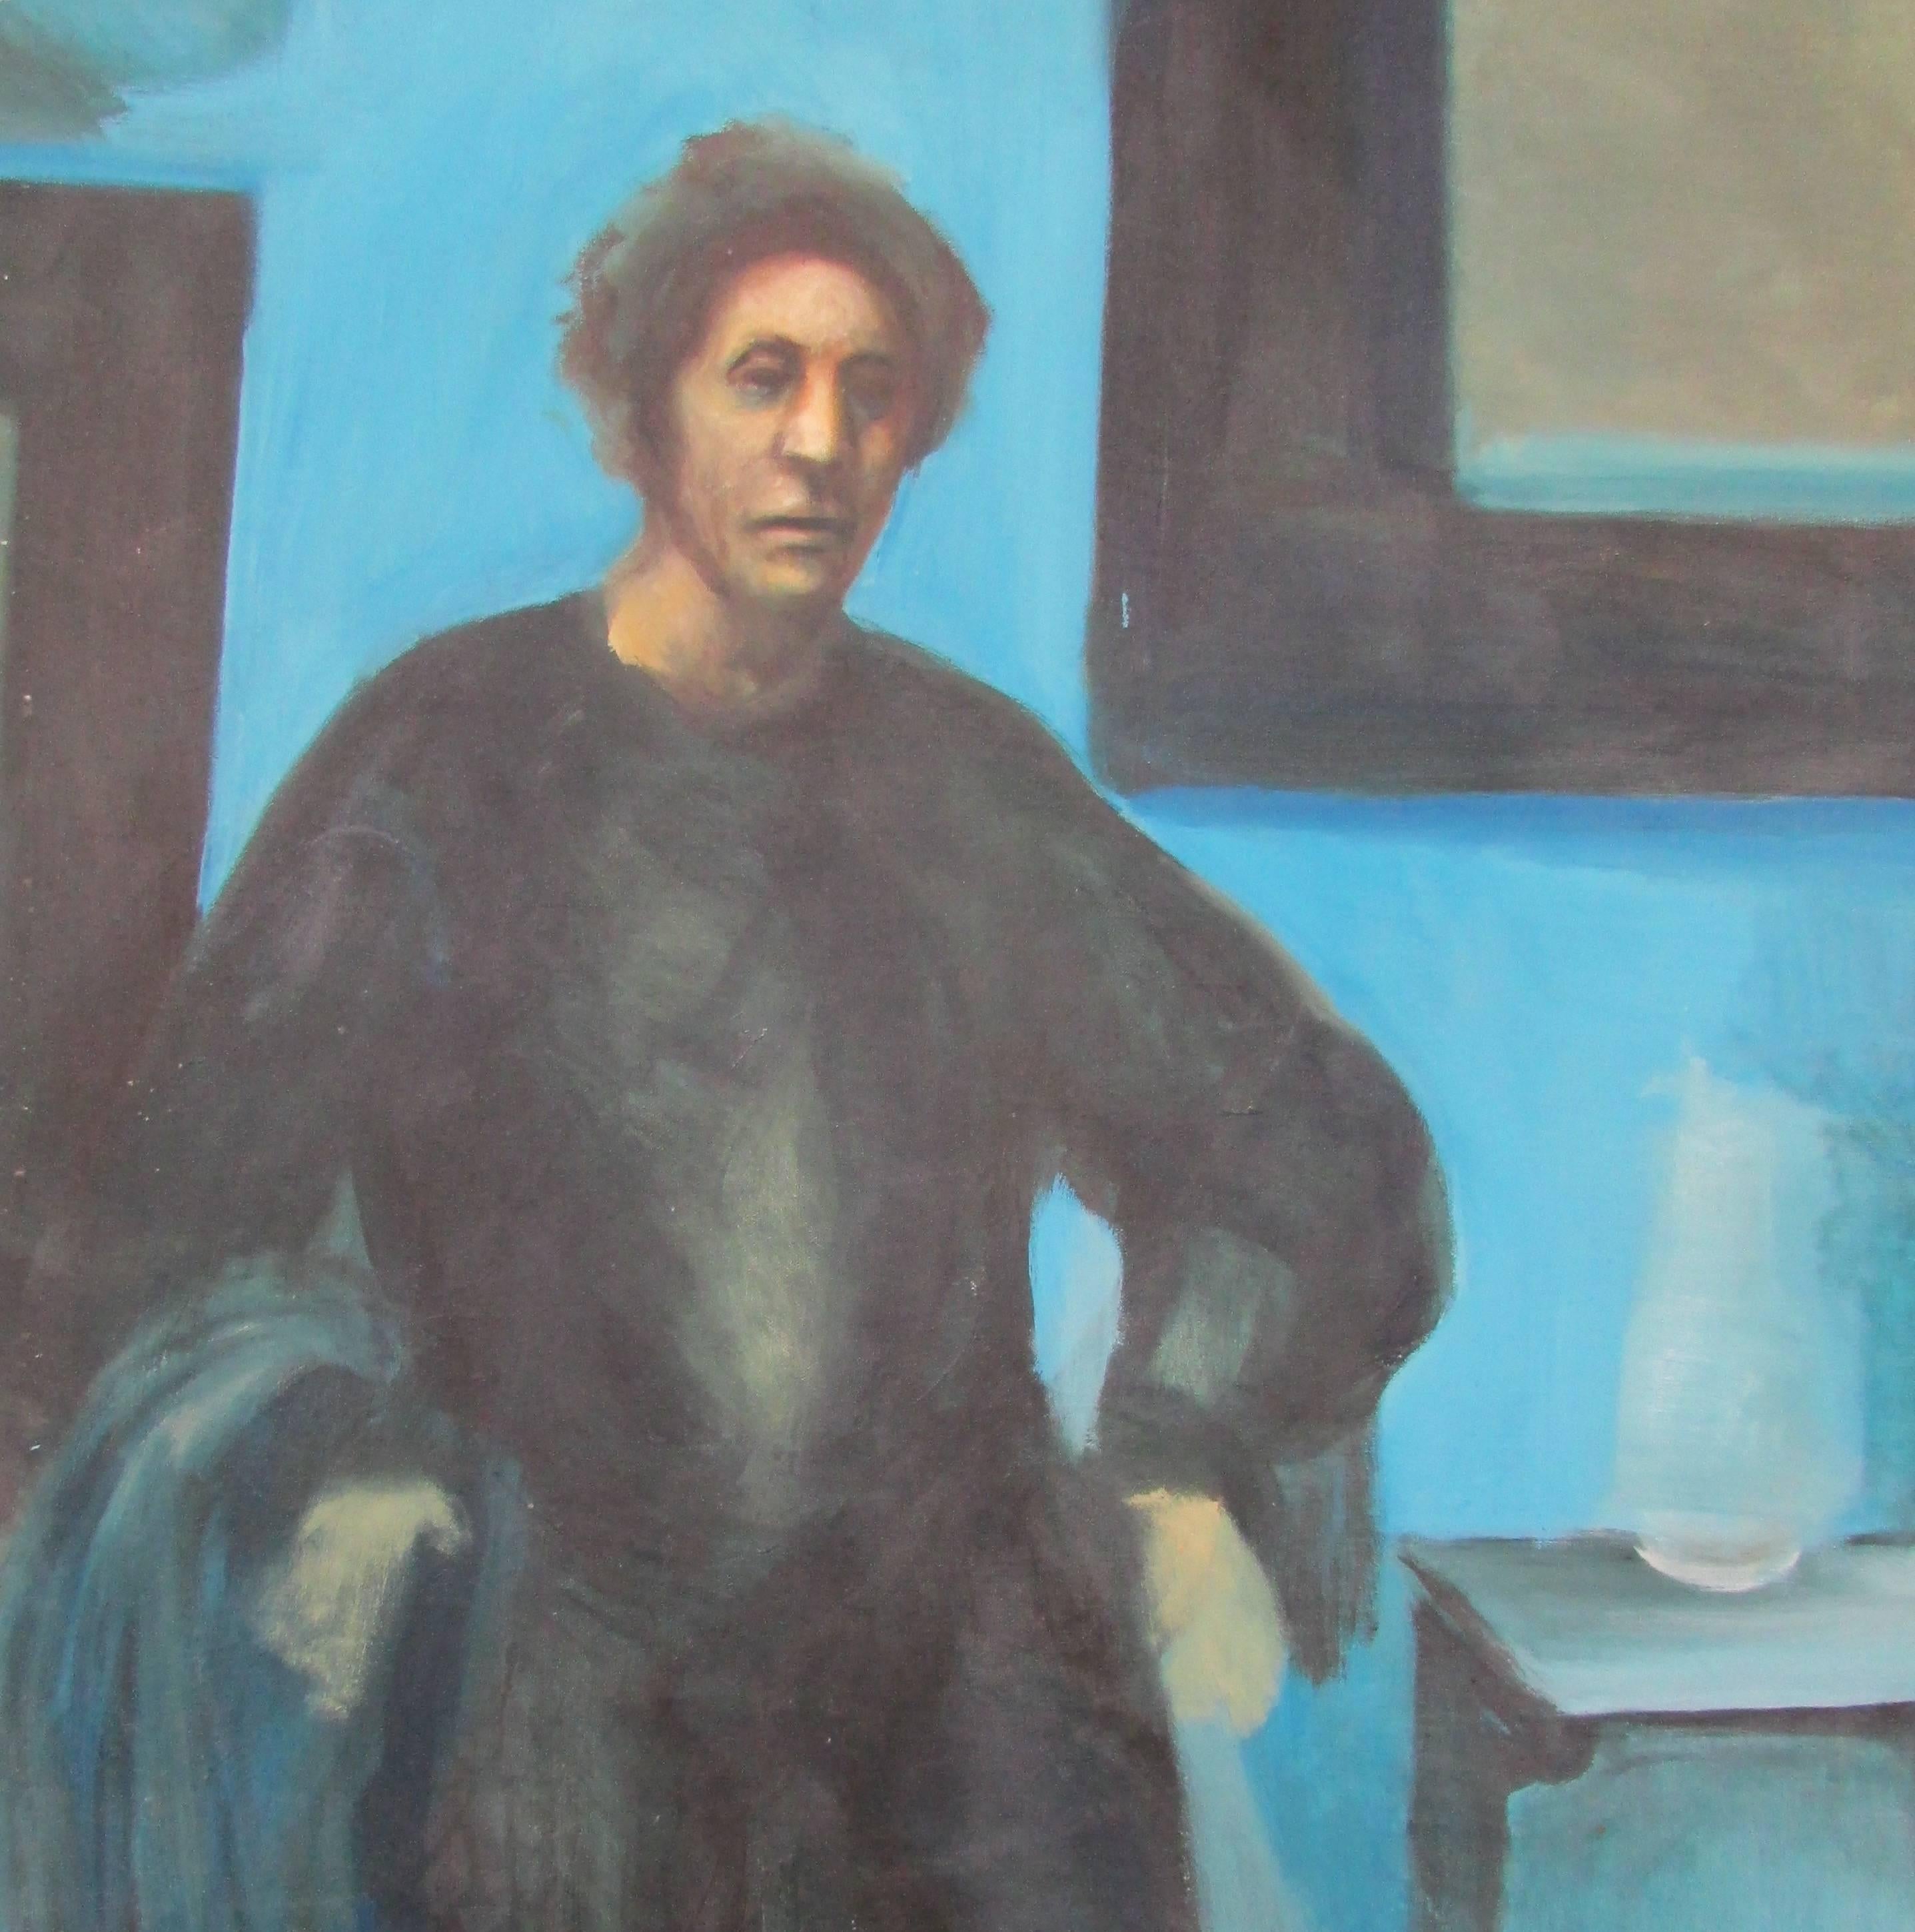 This is a moody oil on canvas of a somber man standing in a blue room.  